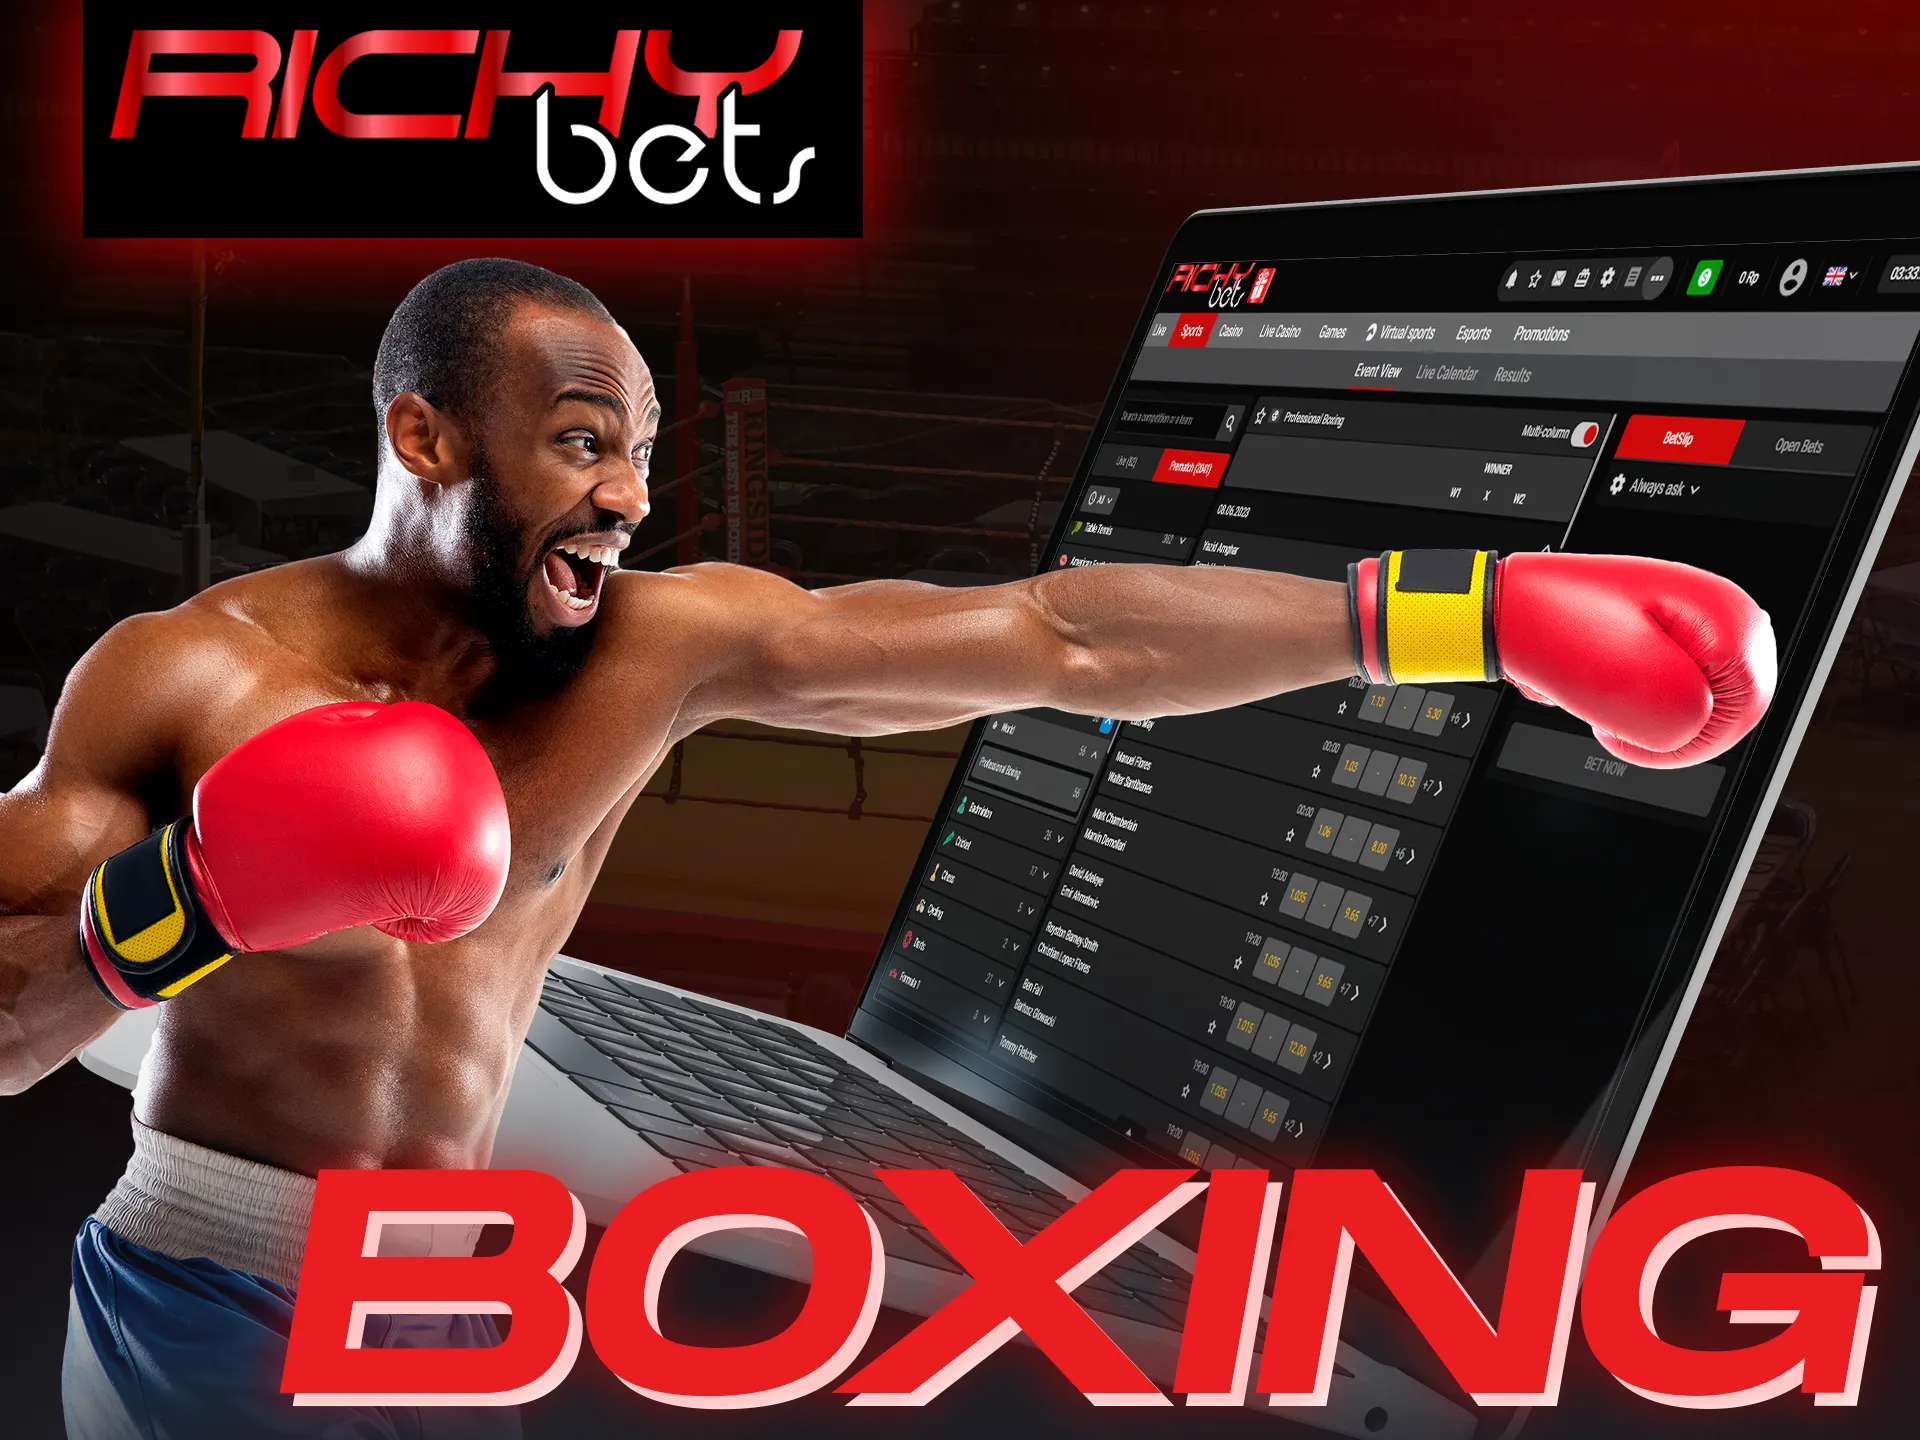 Bet on your favorite boxing fighter at the Richybets.